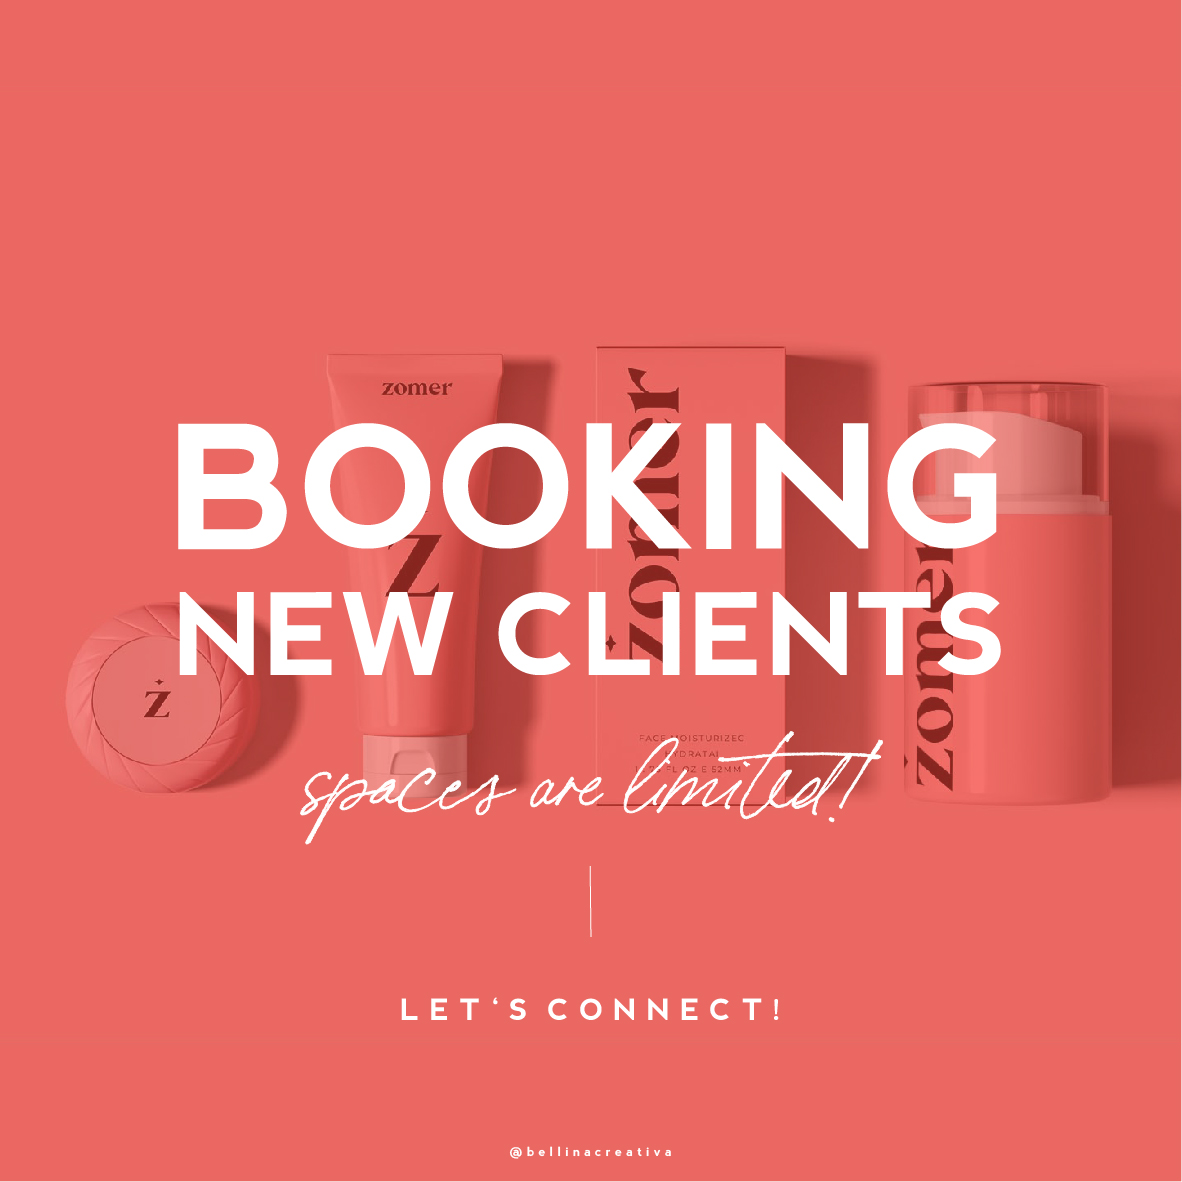 BOOKING NEW CLIENTS : : SPACES ARE LIMITED